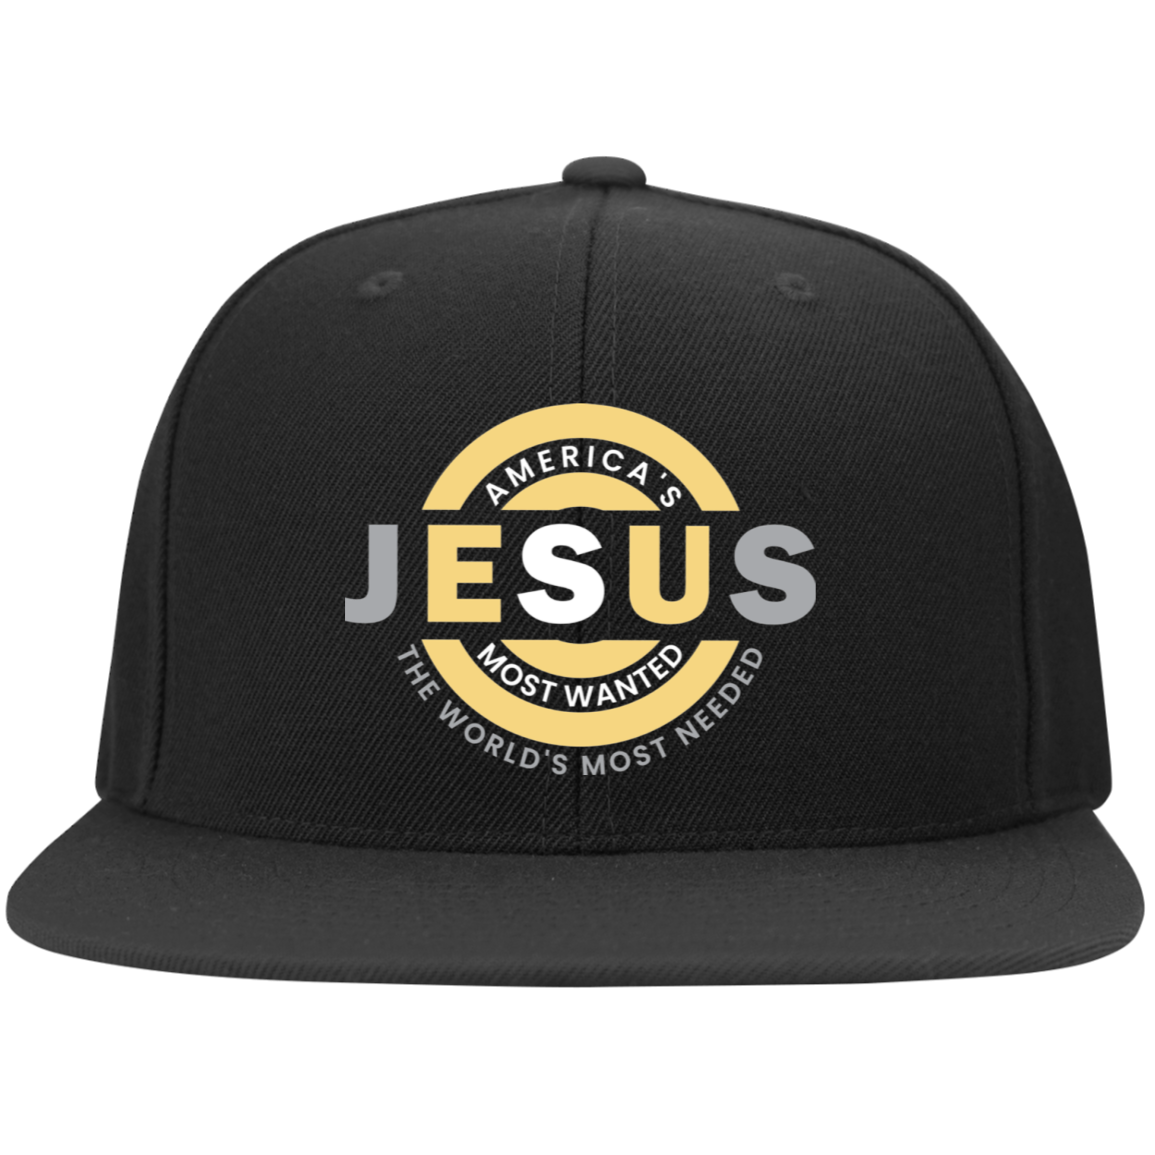 JESUS AMERICA'S MOST WANTED  Embroidered Flat Bill Twill Flexfit Cap